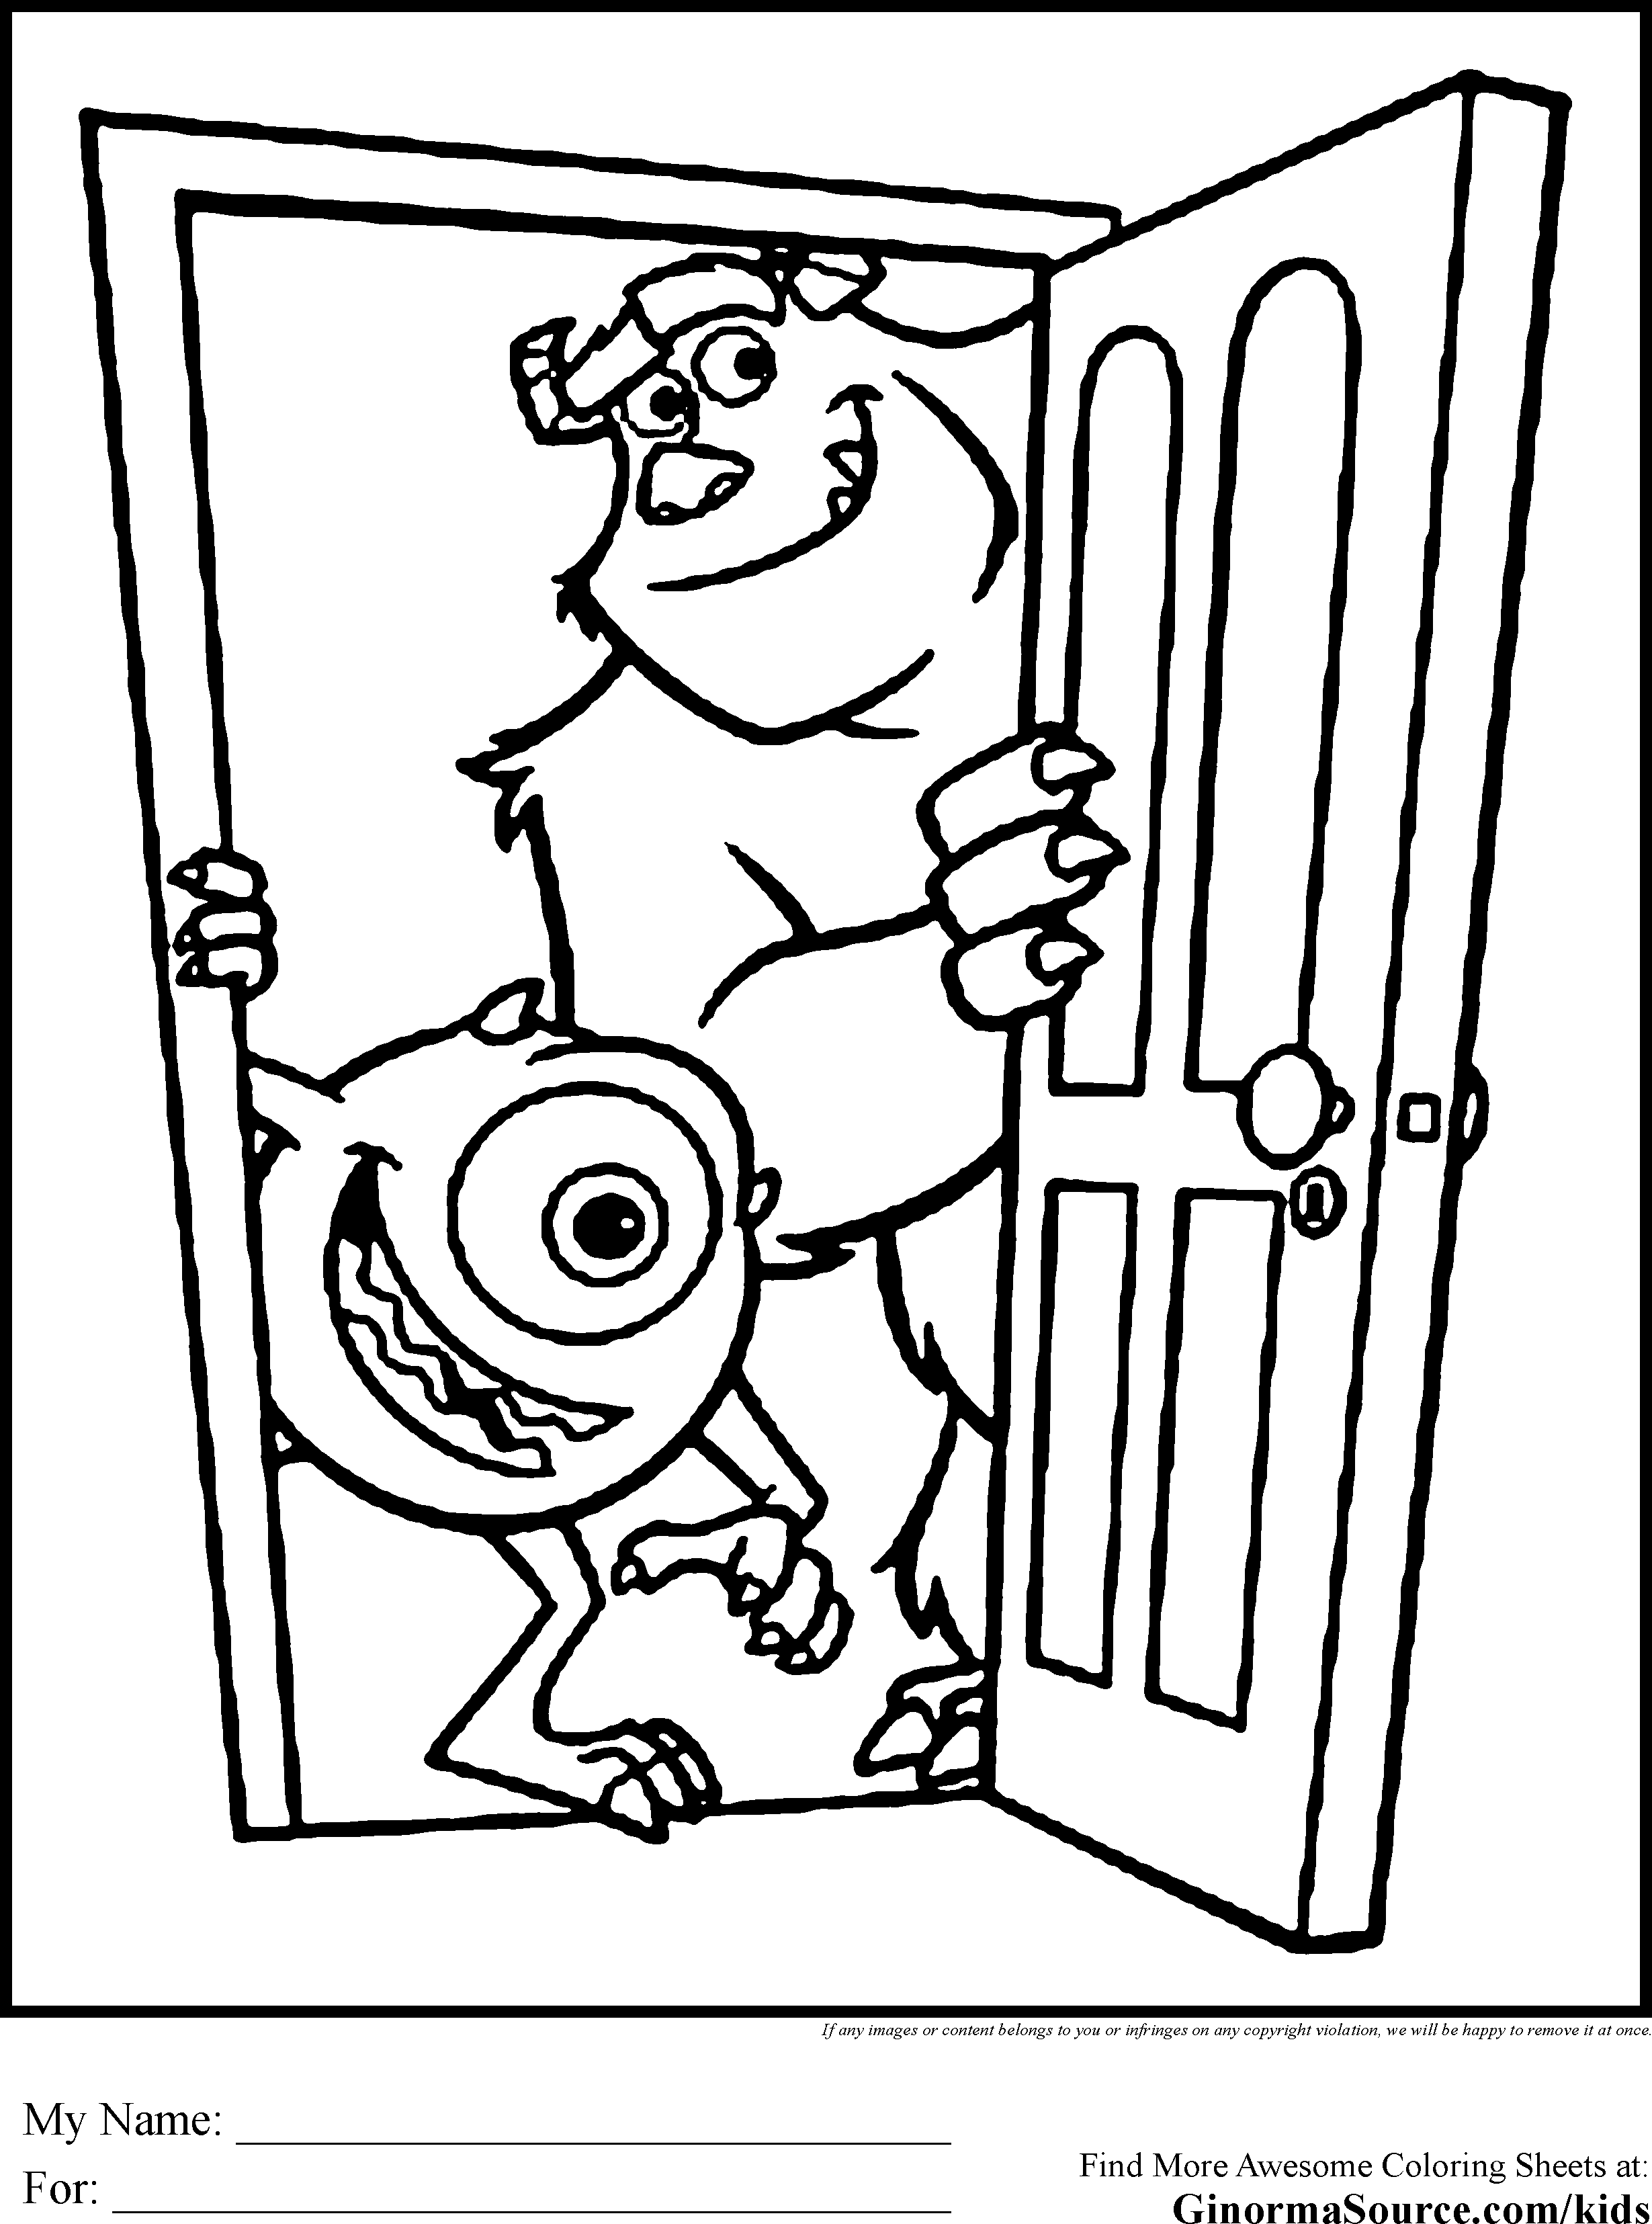 sulley coloring page sulley wearing tie in monsters inc coloring page kids sulley coloring page 